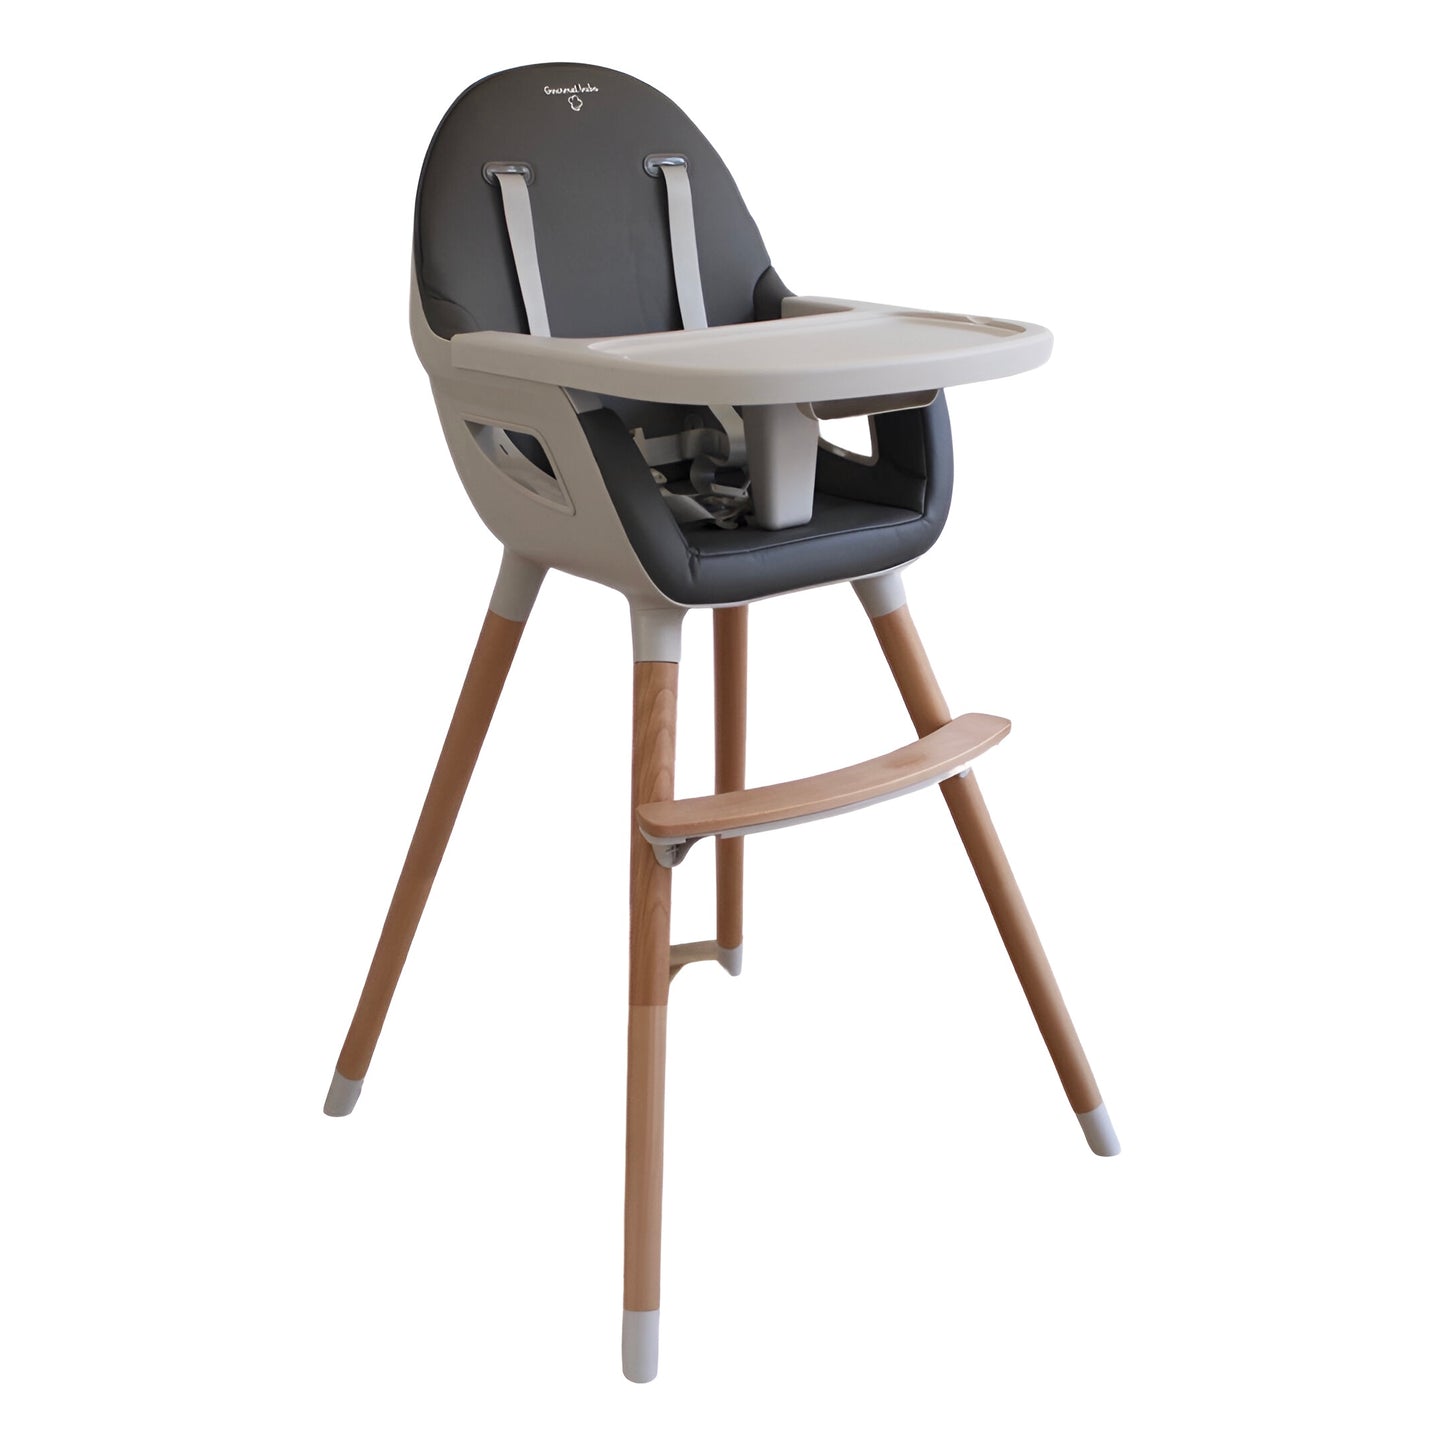 Gourmet Bubs 2-in-1 Premium Leather High Chair with Pop in Tray